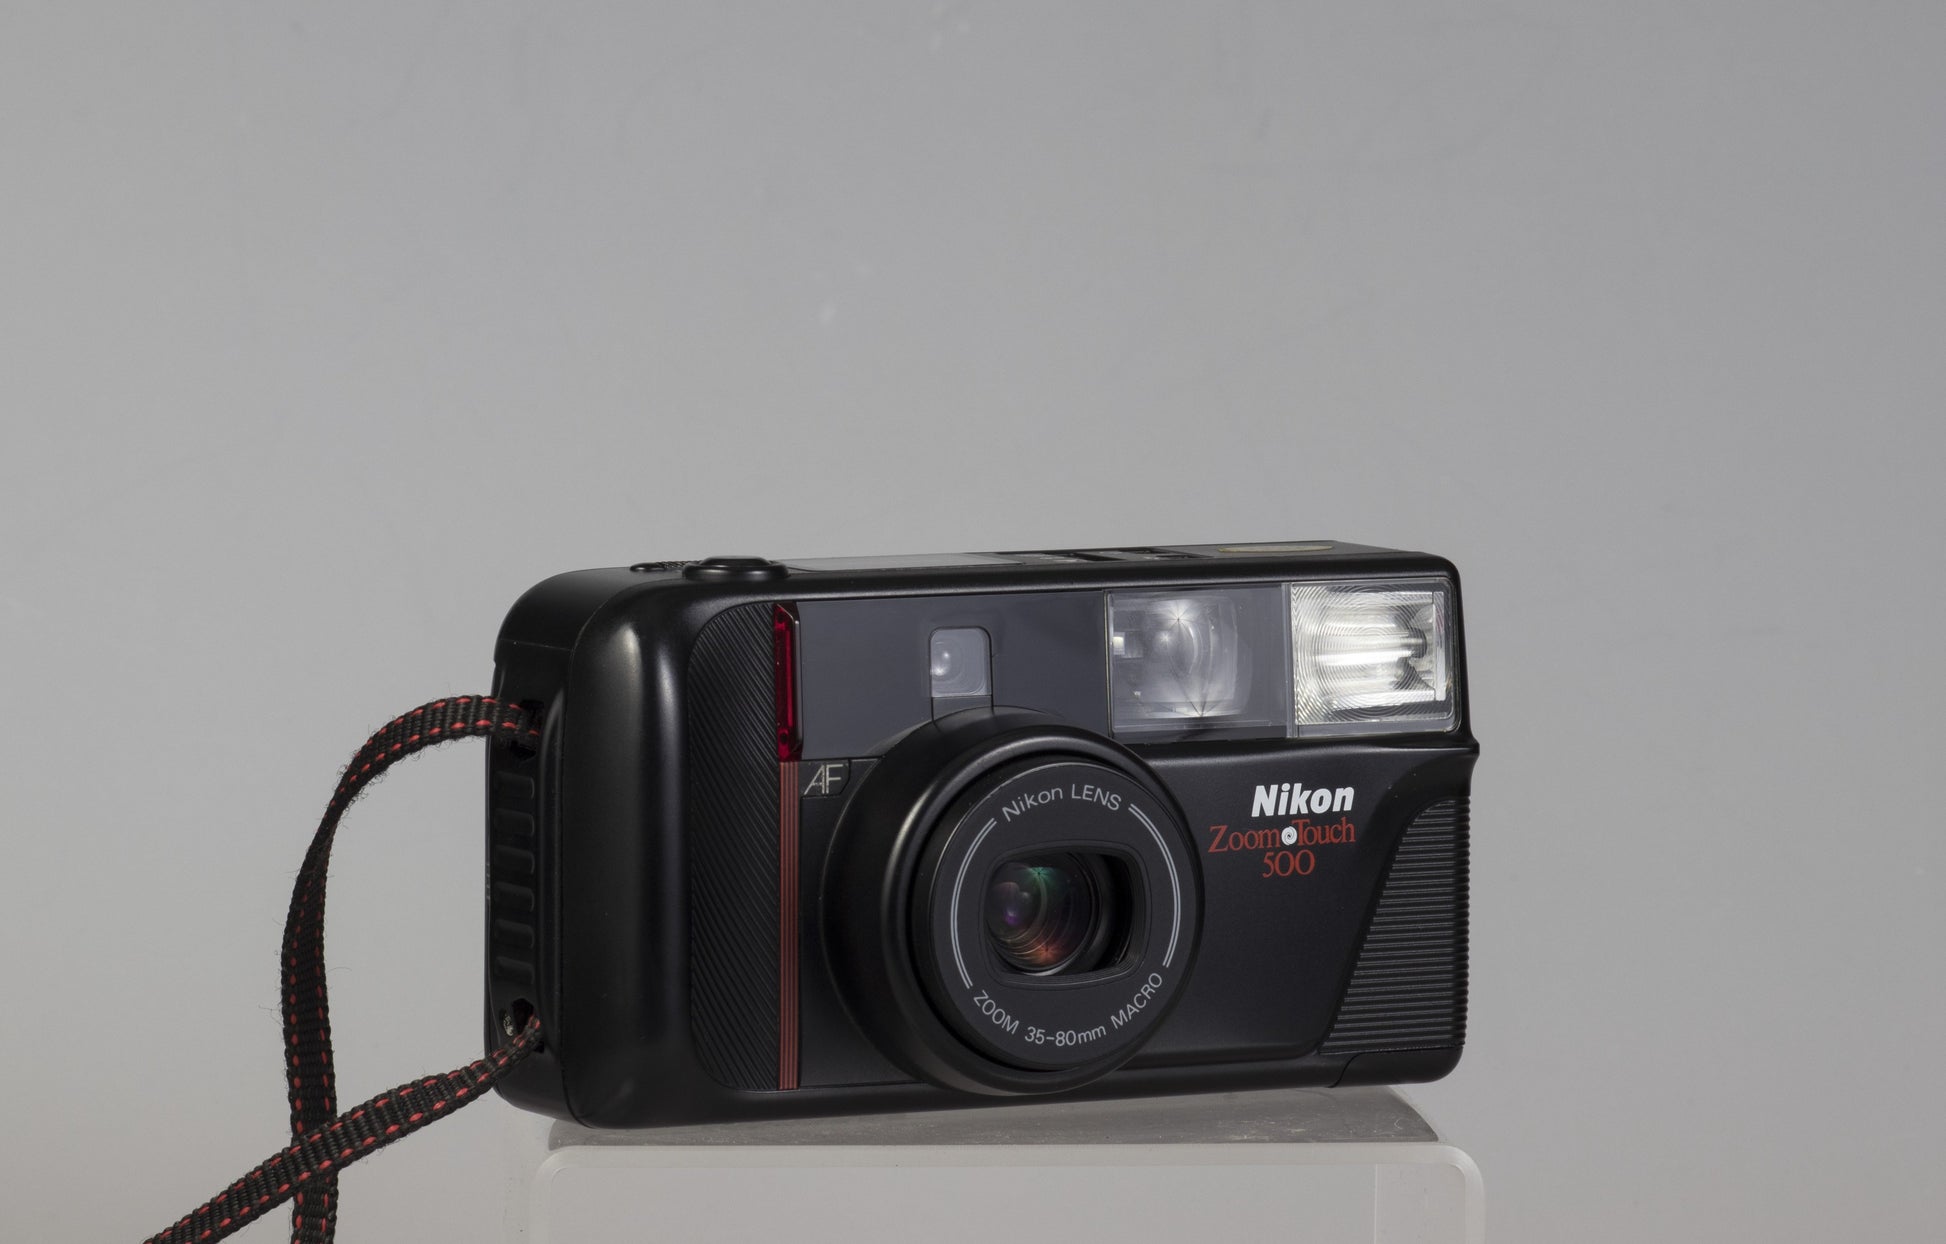 The Nikon Zoom Touch 500: a quality 35mm point-and-shoot camera from the 1990s featuring a 35-80mm zoom lens